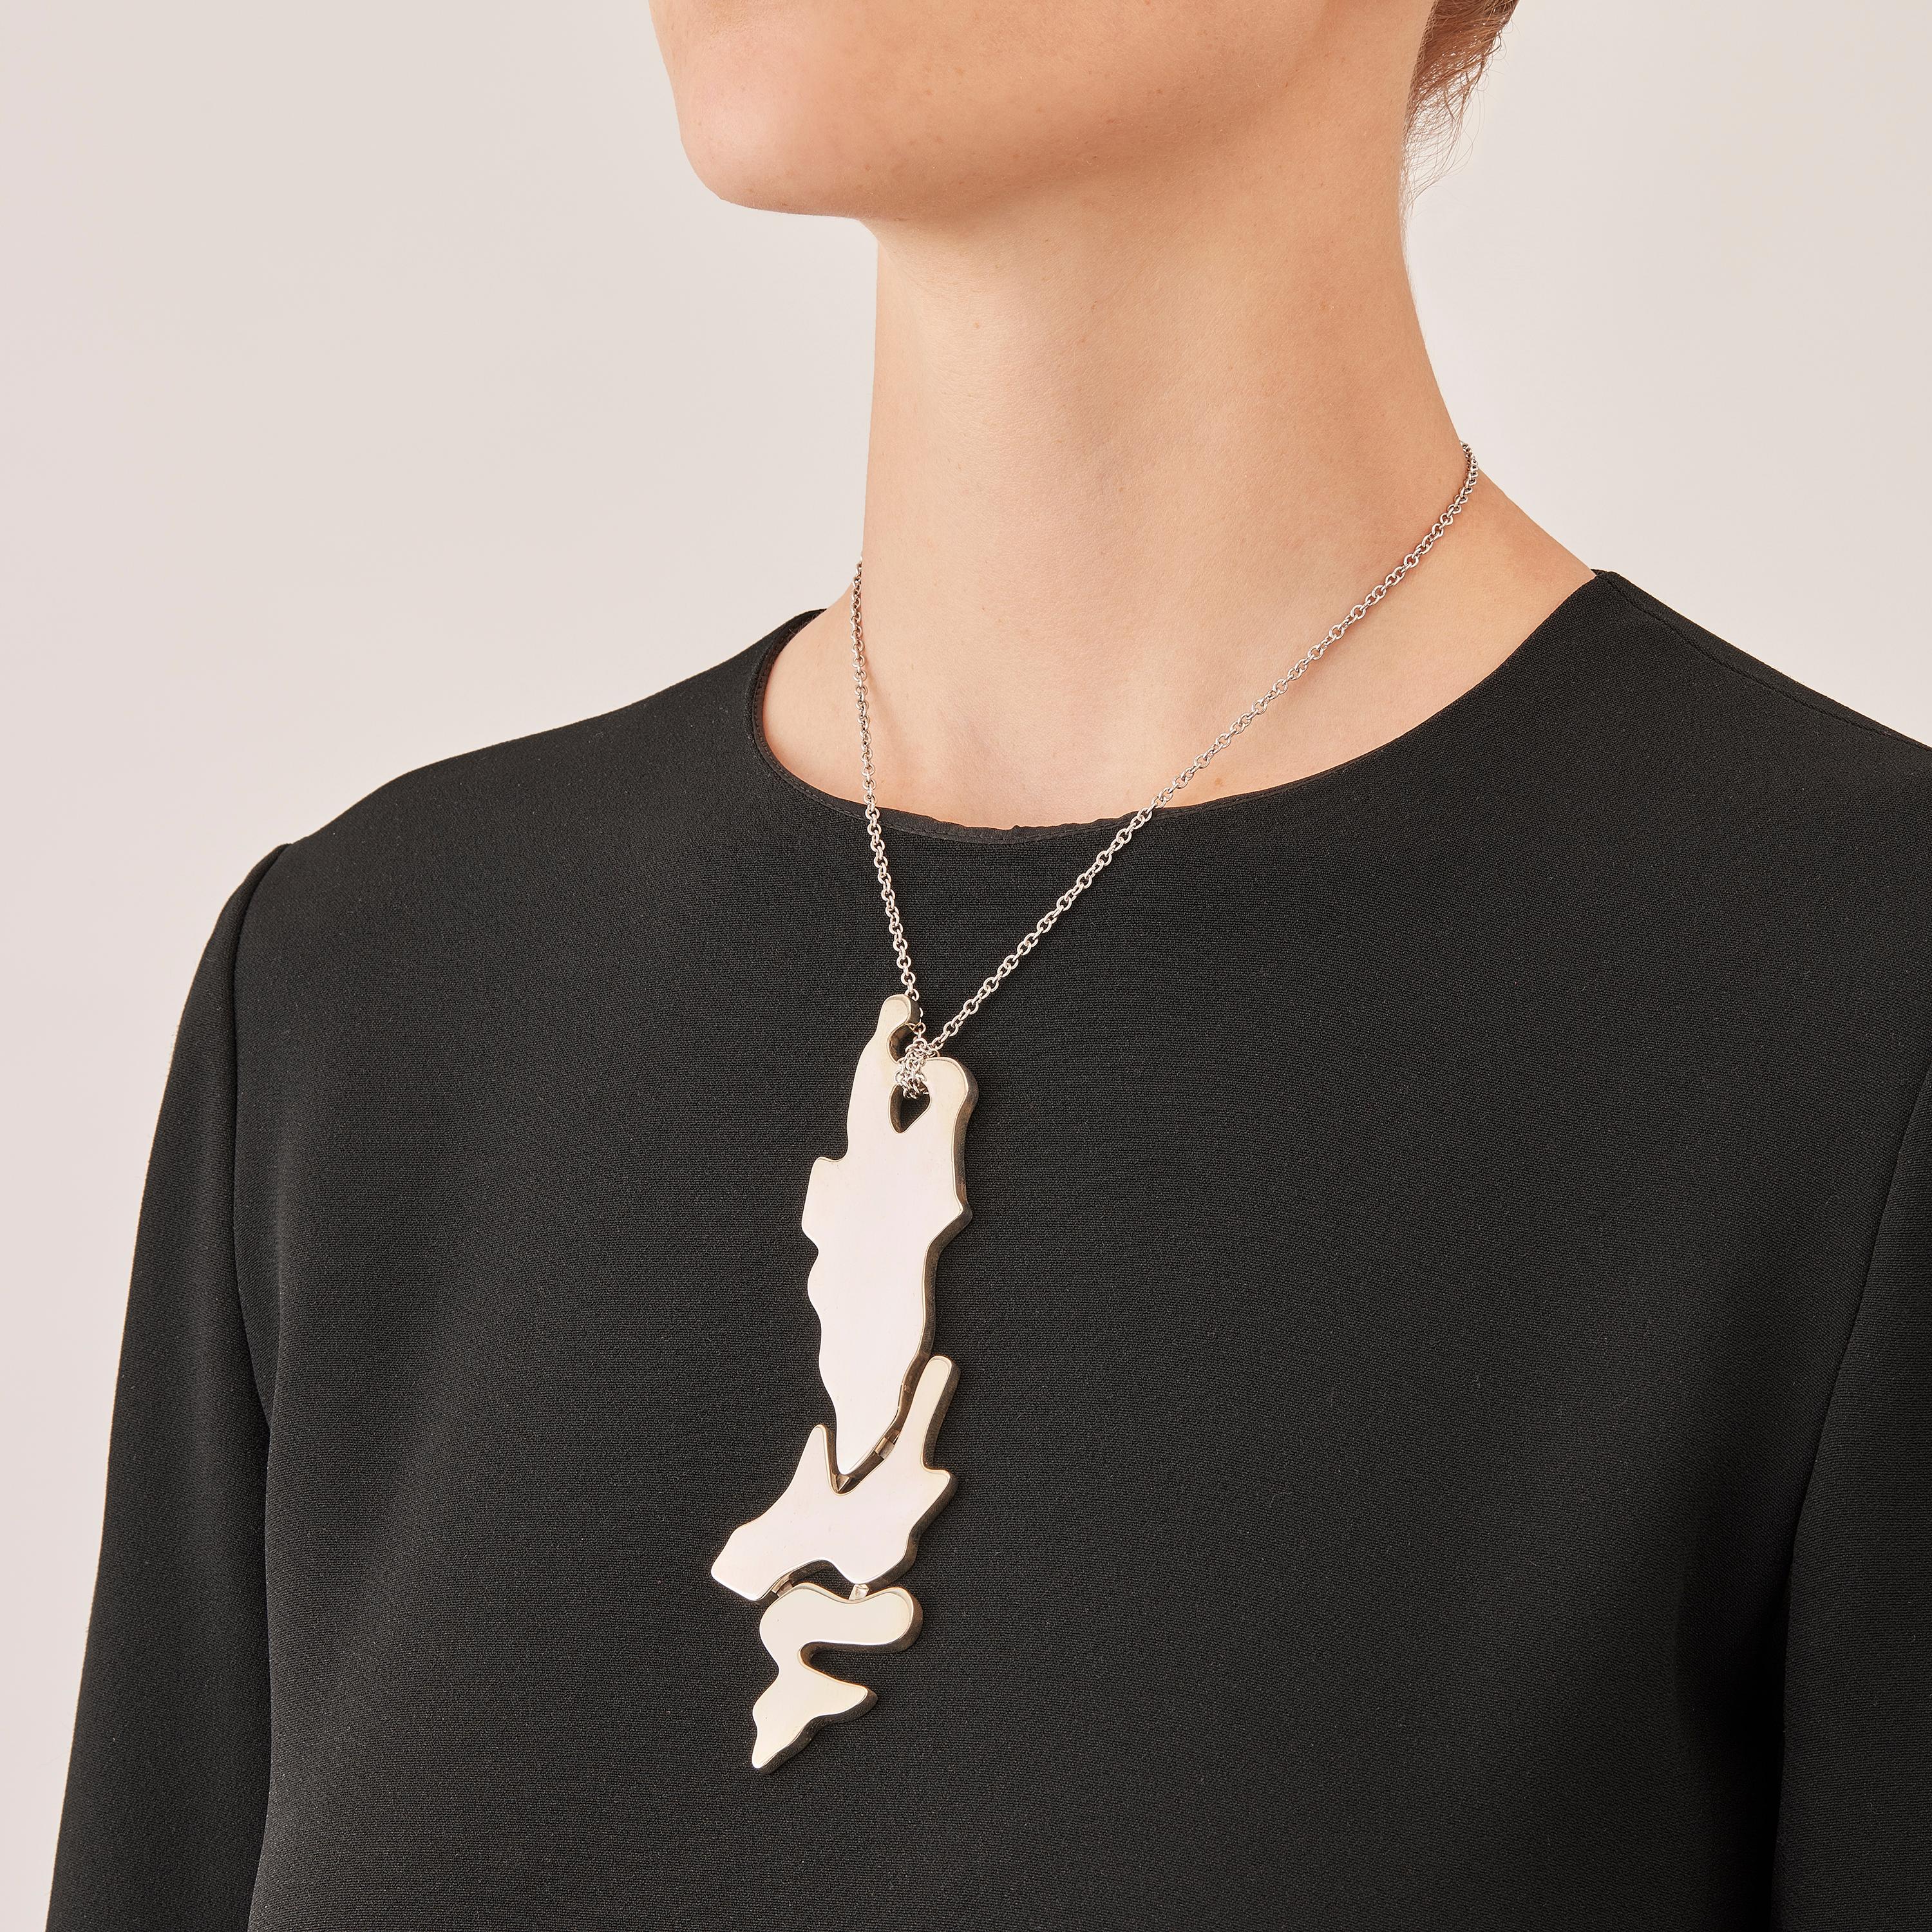 Made by hand in Nathalie Jean's Milan atelier in limited edition, the contemporary Informe Pendant drop necklace necklace is composed of 3 hollow forms of varying dimensions in polished sterling silver. It's little concealed links allow the piece to